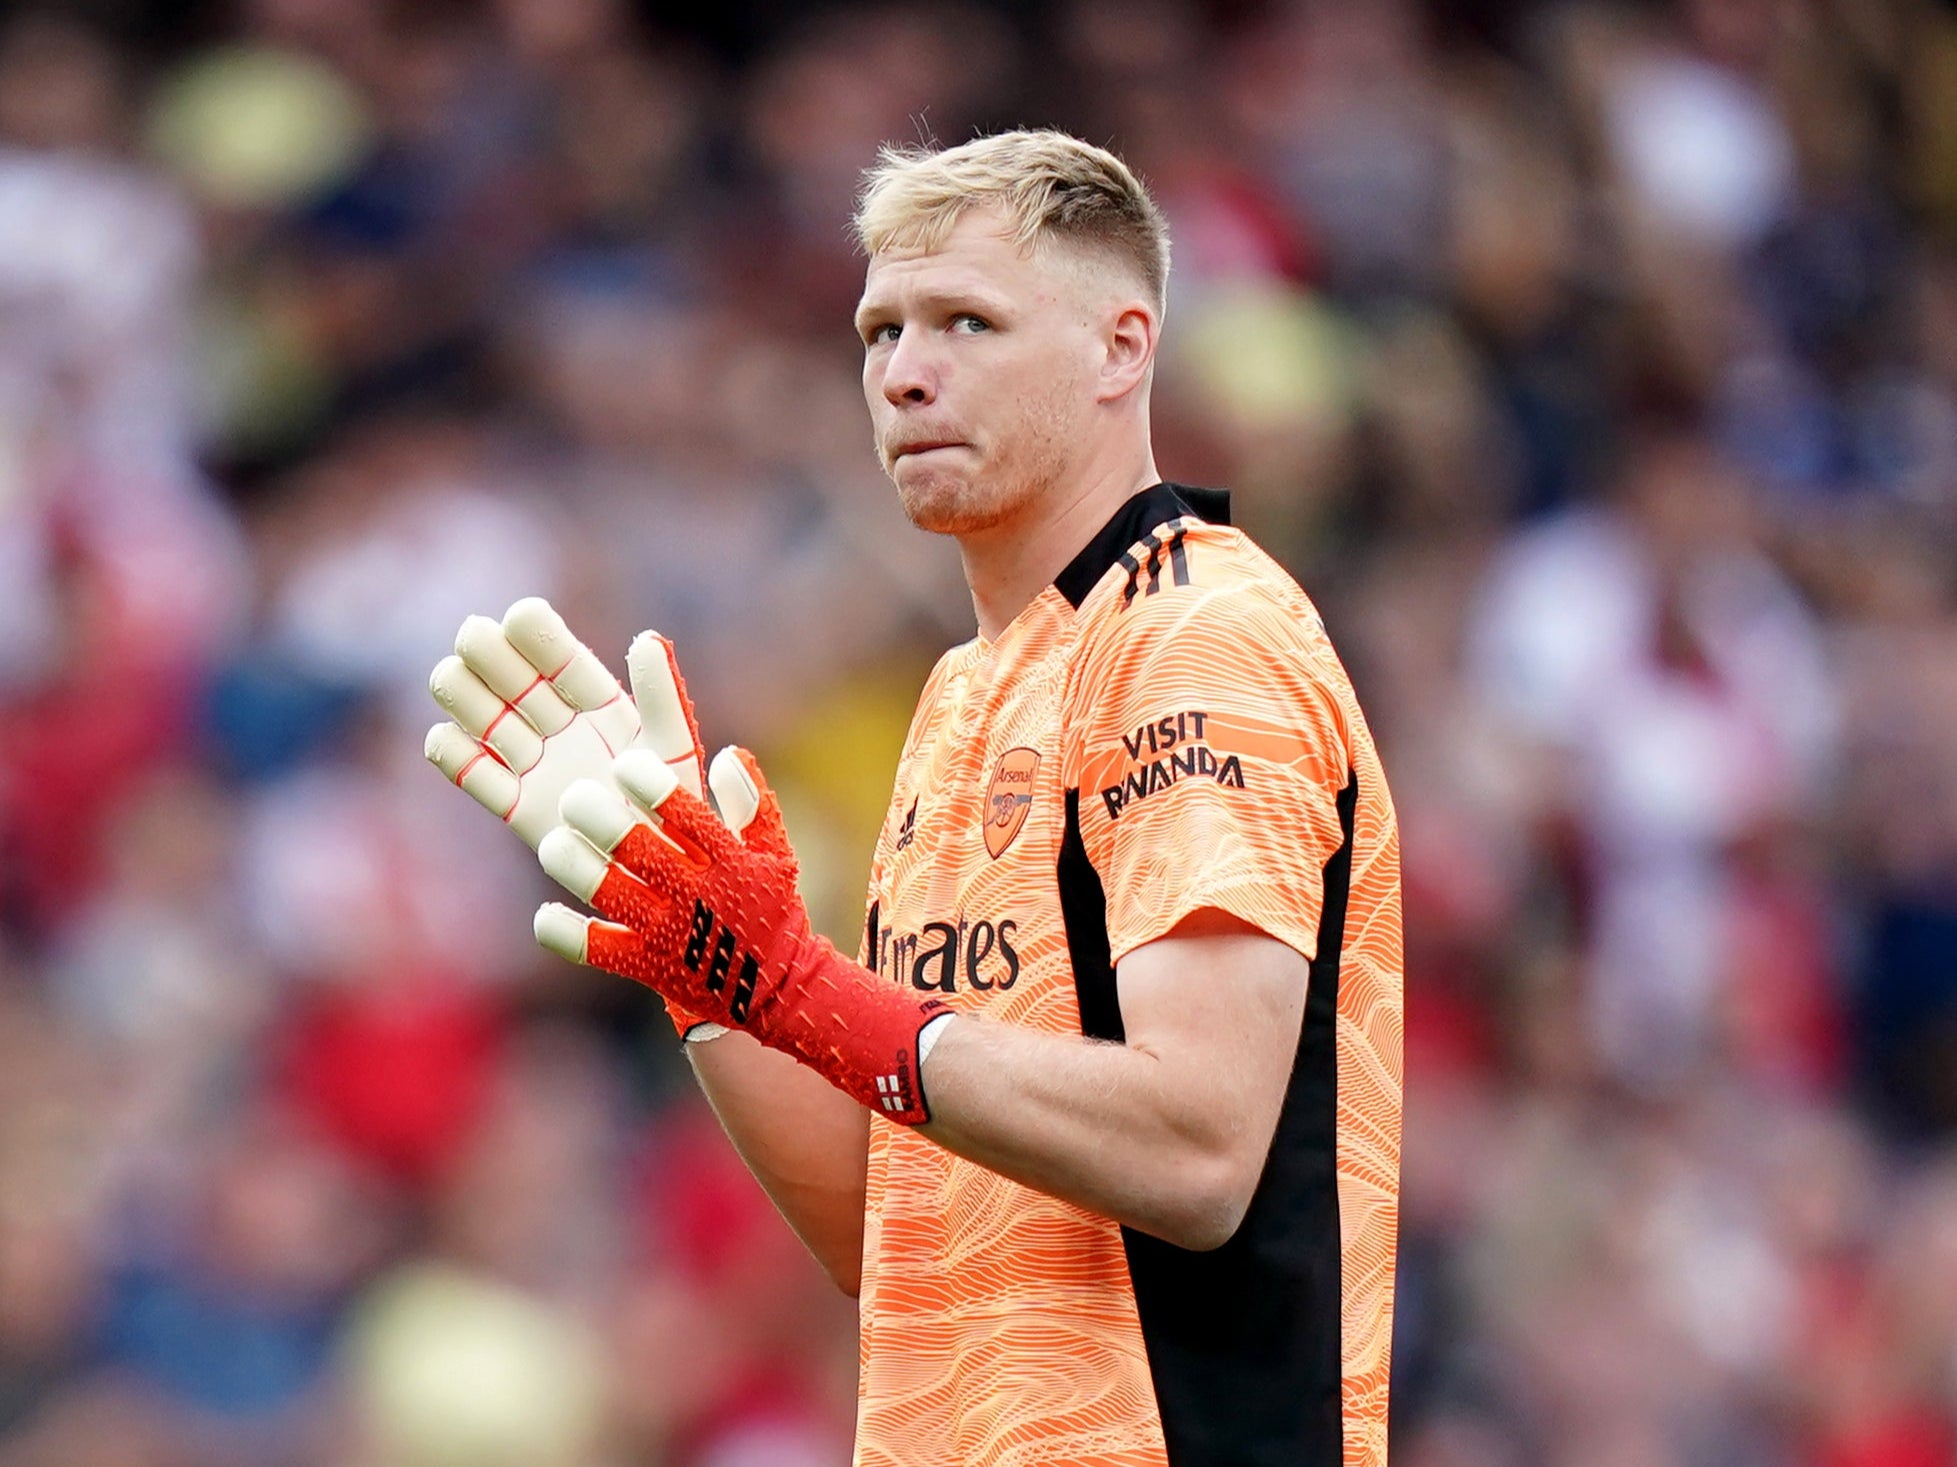 Aaron Ramsdale kept a clean sheet during Arsenal’s win (Tess Derry/PA)